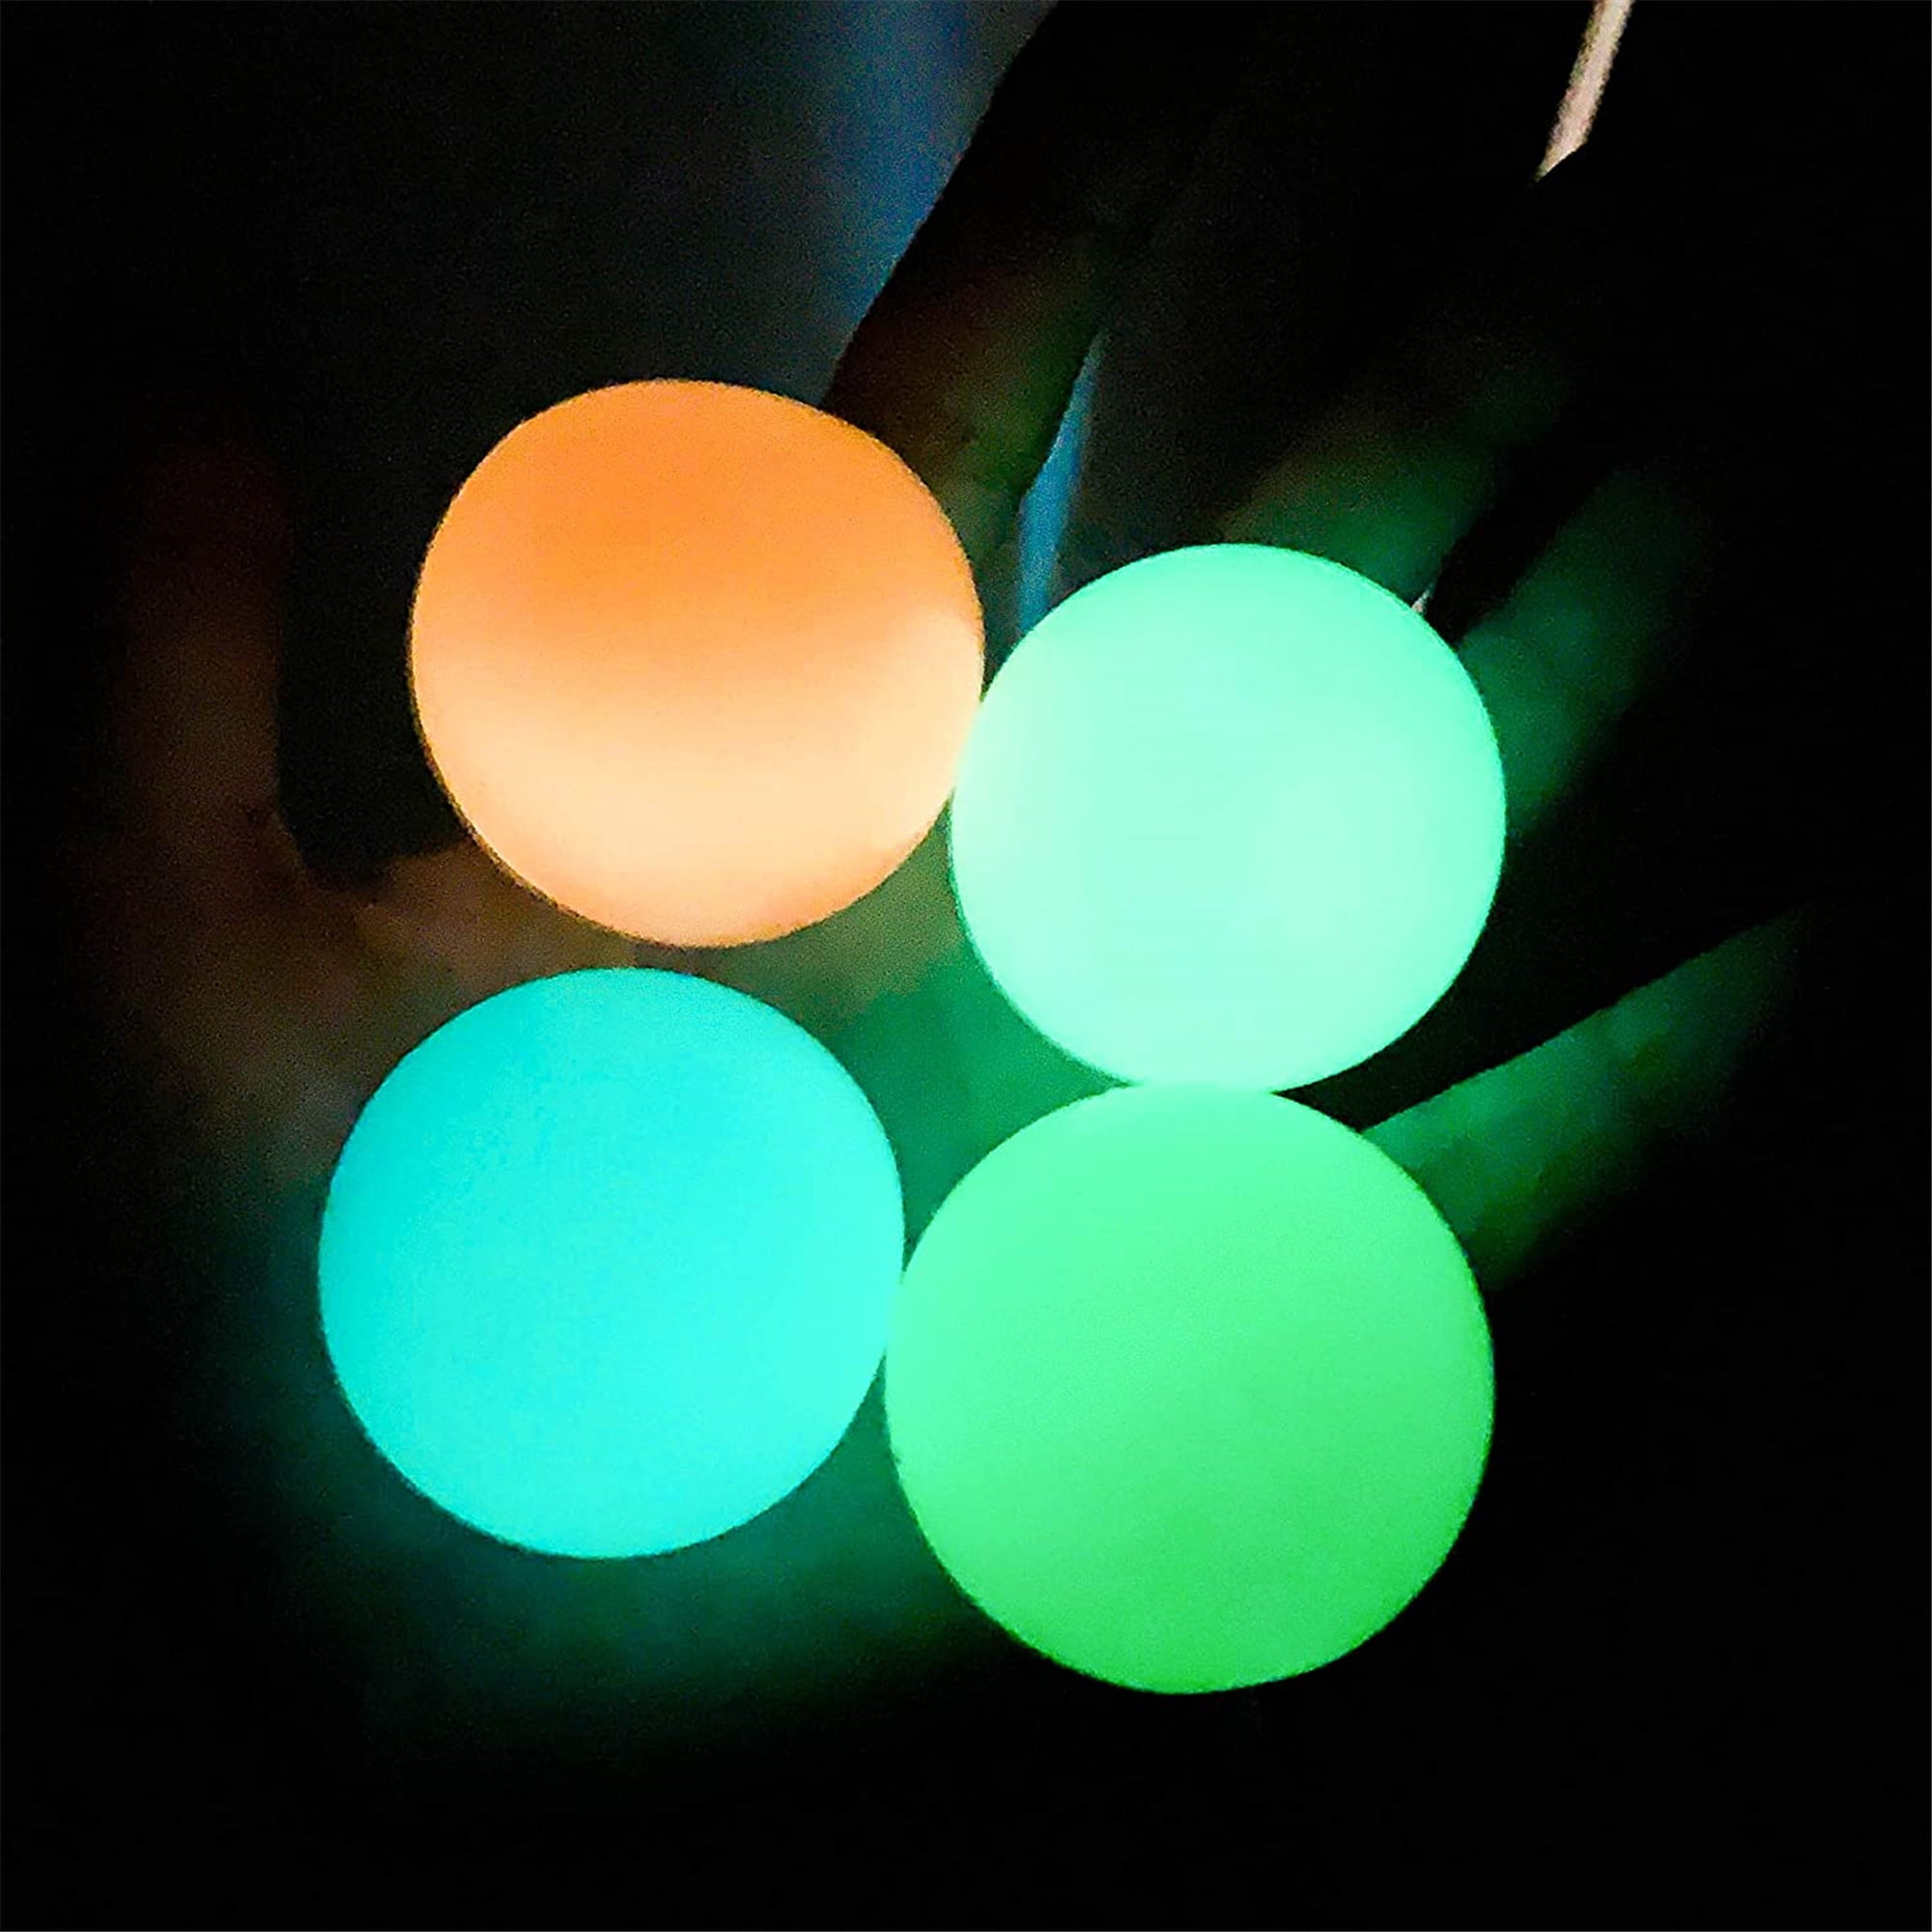 Luminescent Stress Relief Balls Sticky Ball 4 Pcs Ceiling Sticky Wall Balls Glow in The Dark Non-Toxic Squishy Glow Stress Relief Toys for Kids and Adults Tear-Resistant 